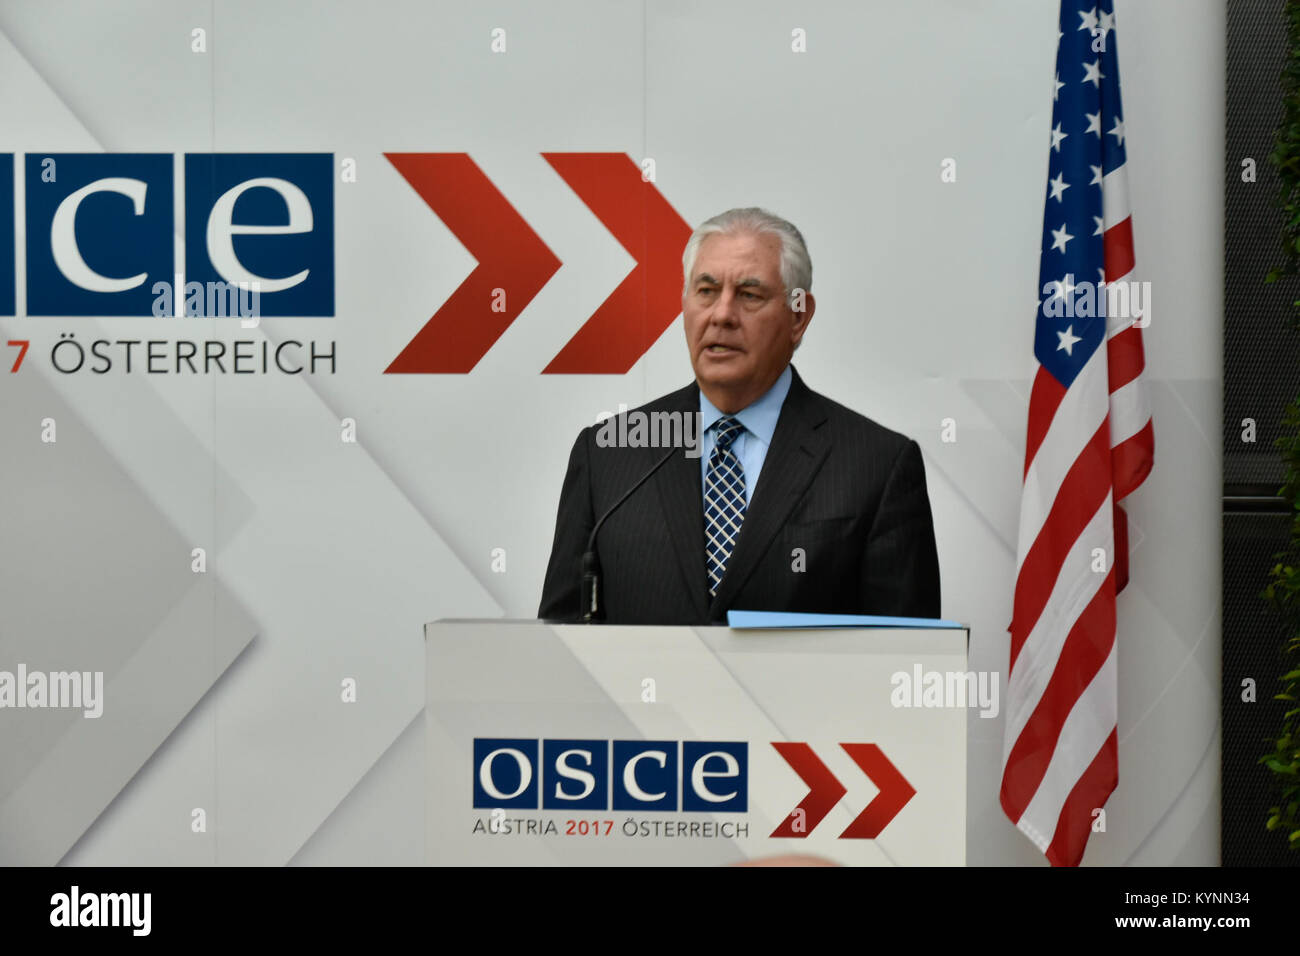 U.S. Secretary of State Rex Tillerson addresses the media at the 2017 Organization for Security and Co-operation in Europe  (OSCE )Ministerial Council in Vienna, Austria on December 7, 2017. Stock Photo